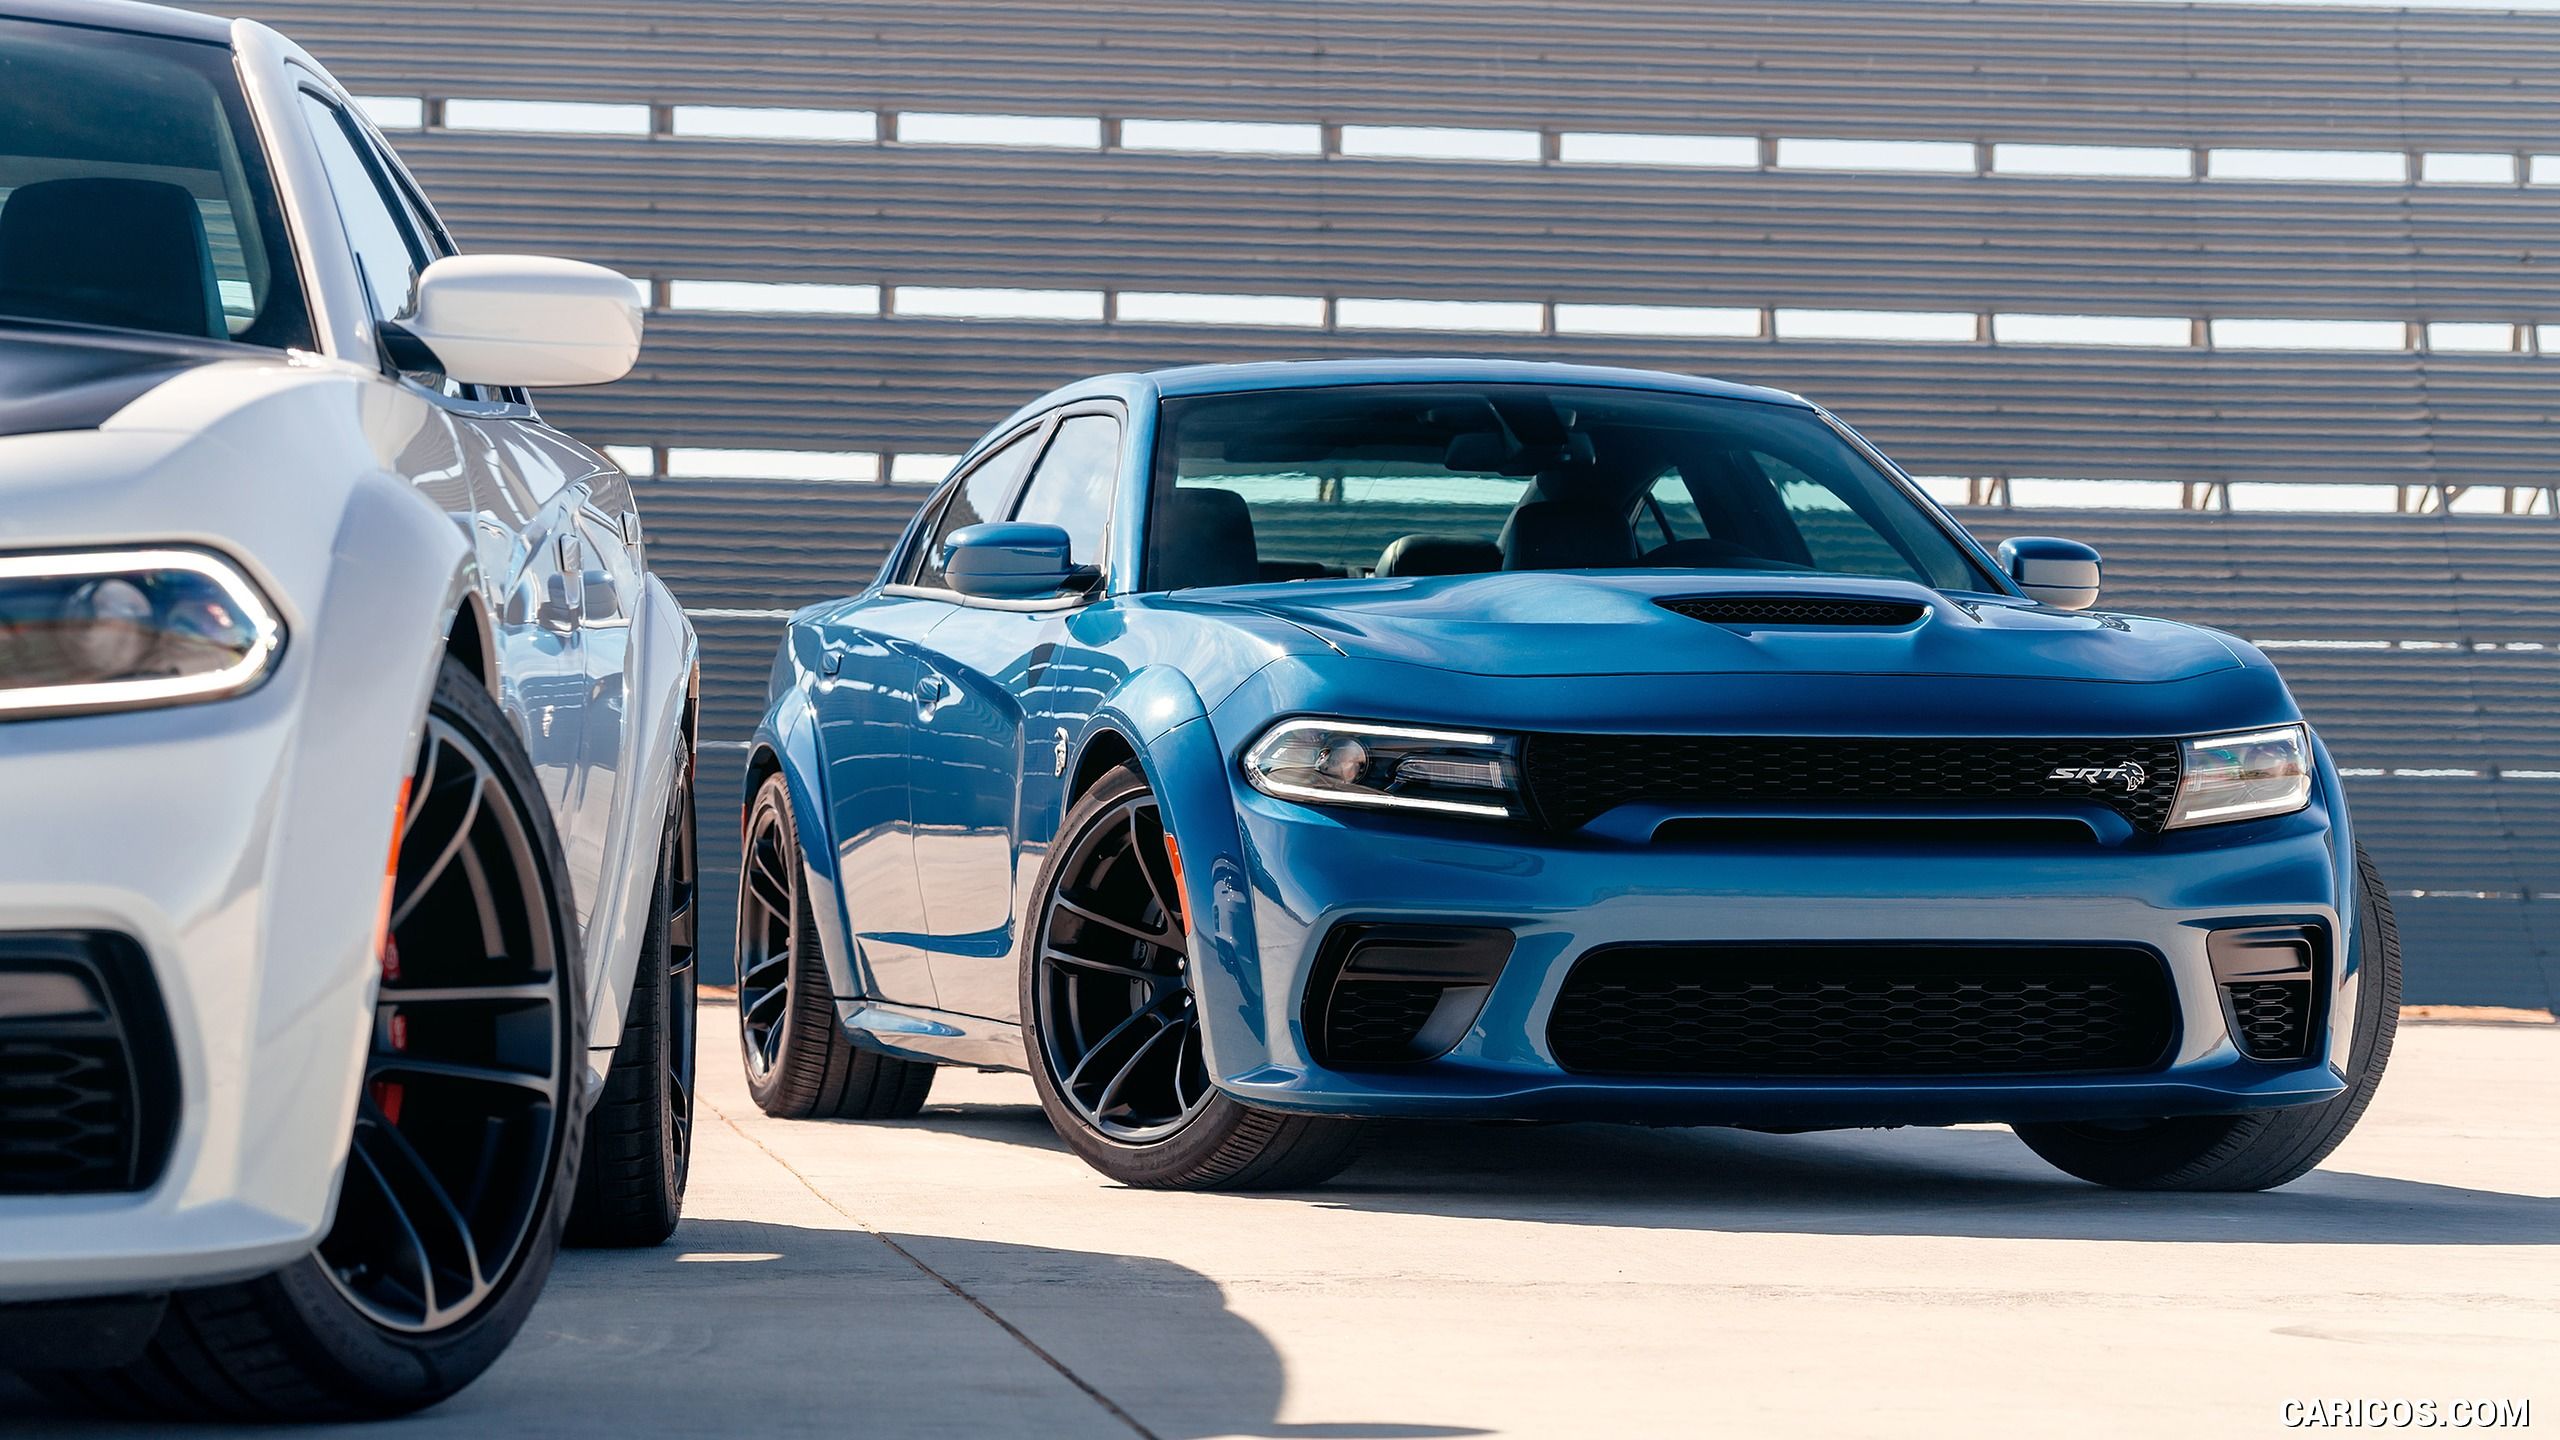 Wallpaper Dodge Charger Srt Hellcat Widebody 2020 Dodge Charger Srt  Hellcat Dodge 2020 Dodge Charger Scat Pack Cars Background  Download  Free Image